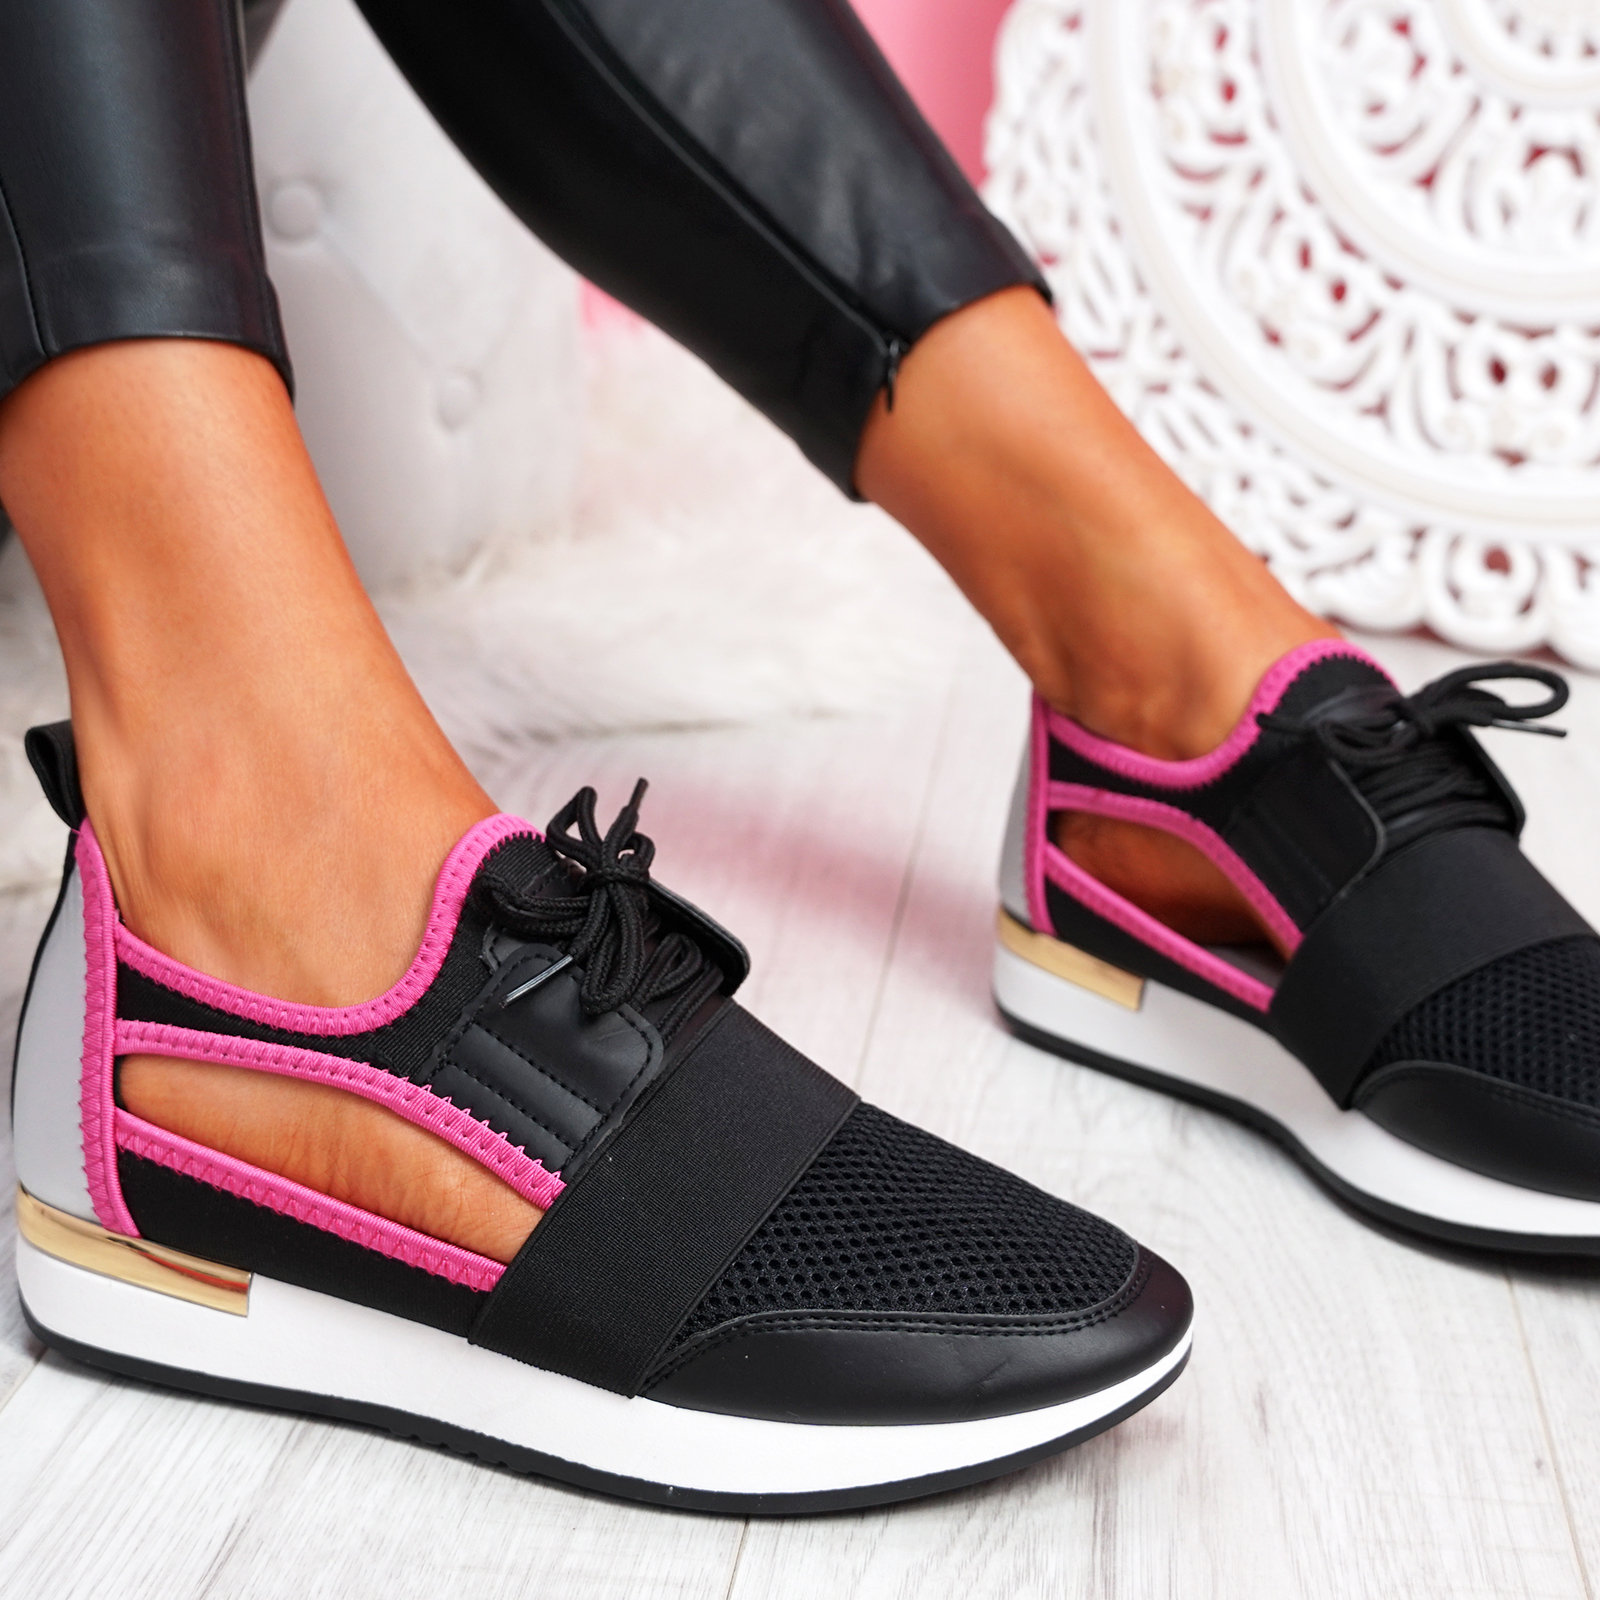 WOMENS LADIES CUT OUT SPORT SNEAKERS PARTY TRAINERS MULTICOLOR WOMEN ...